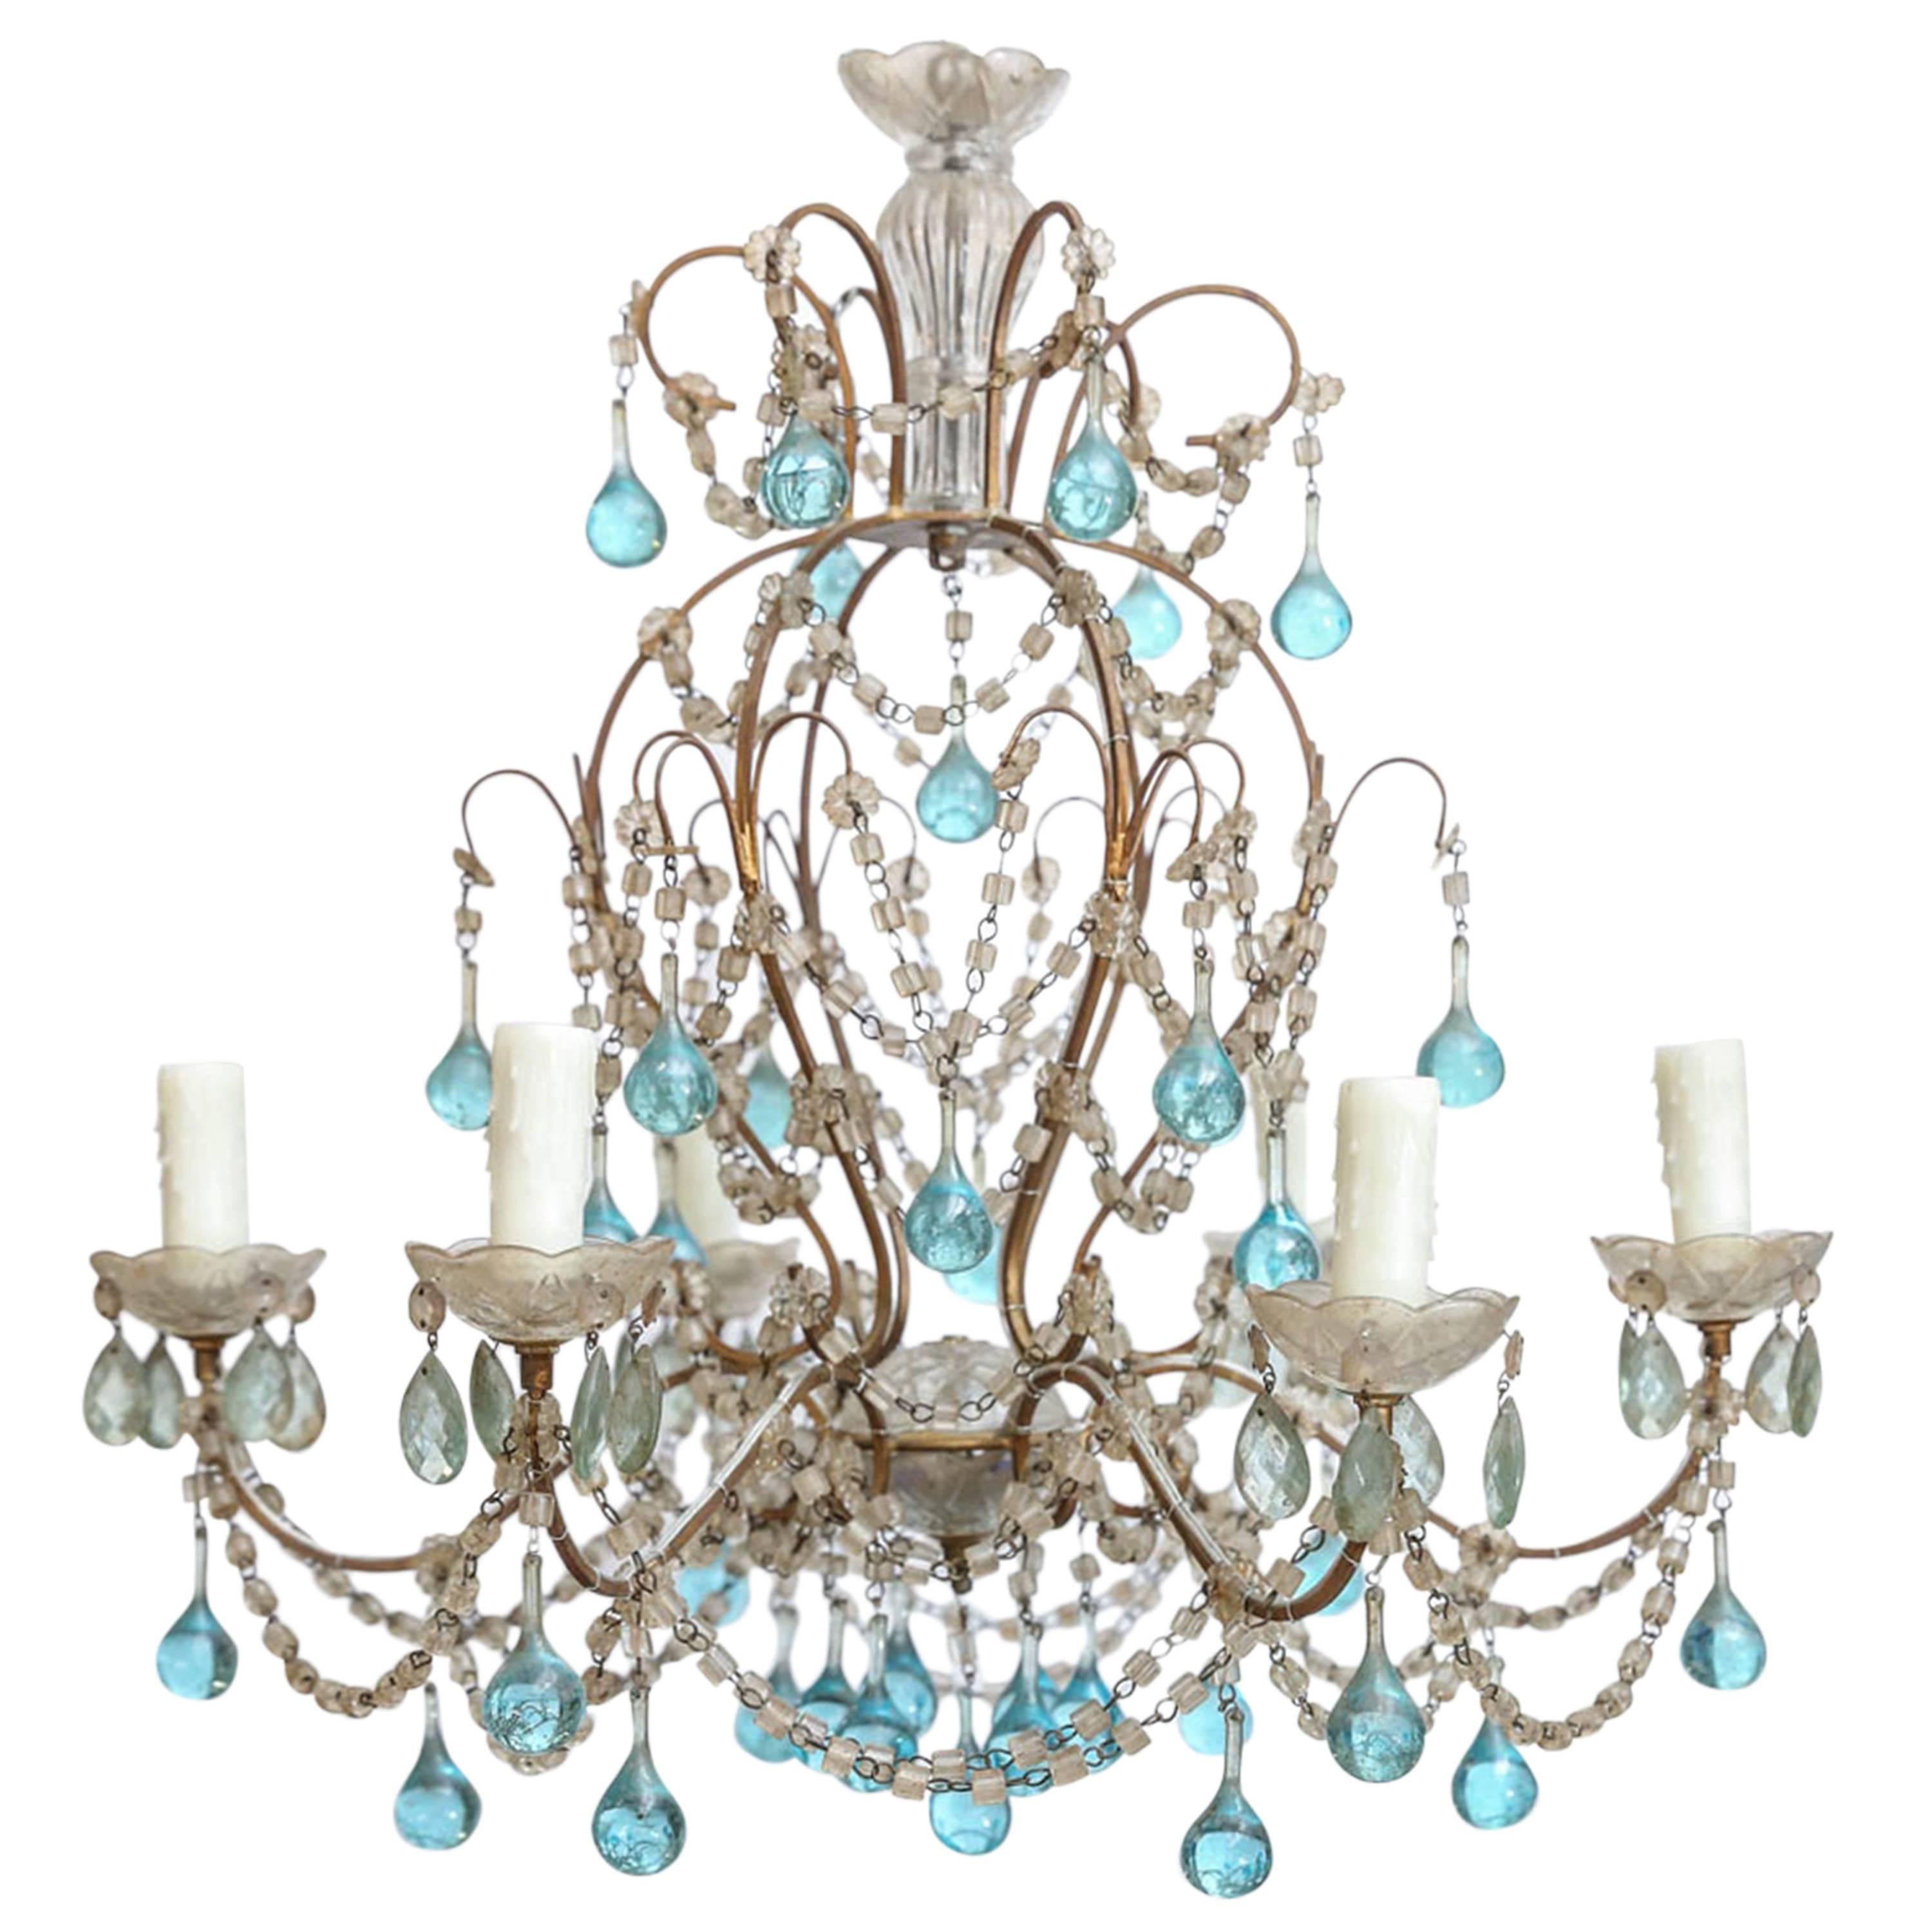 Petite Italian Chandelier with Accent Blue Murano Glass Drops and Crystals